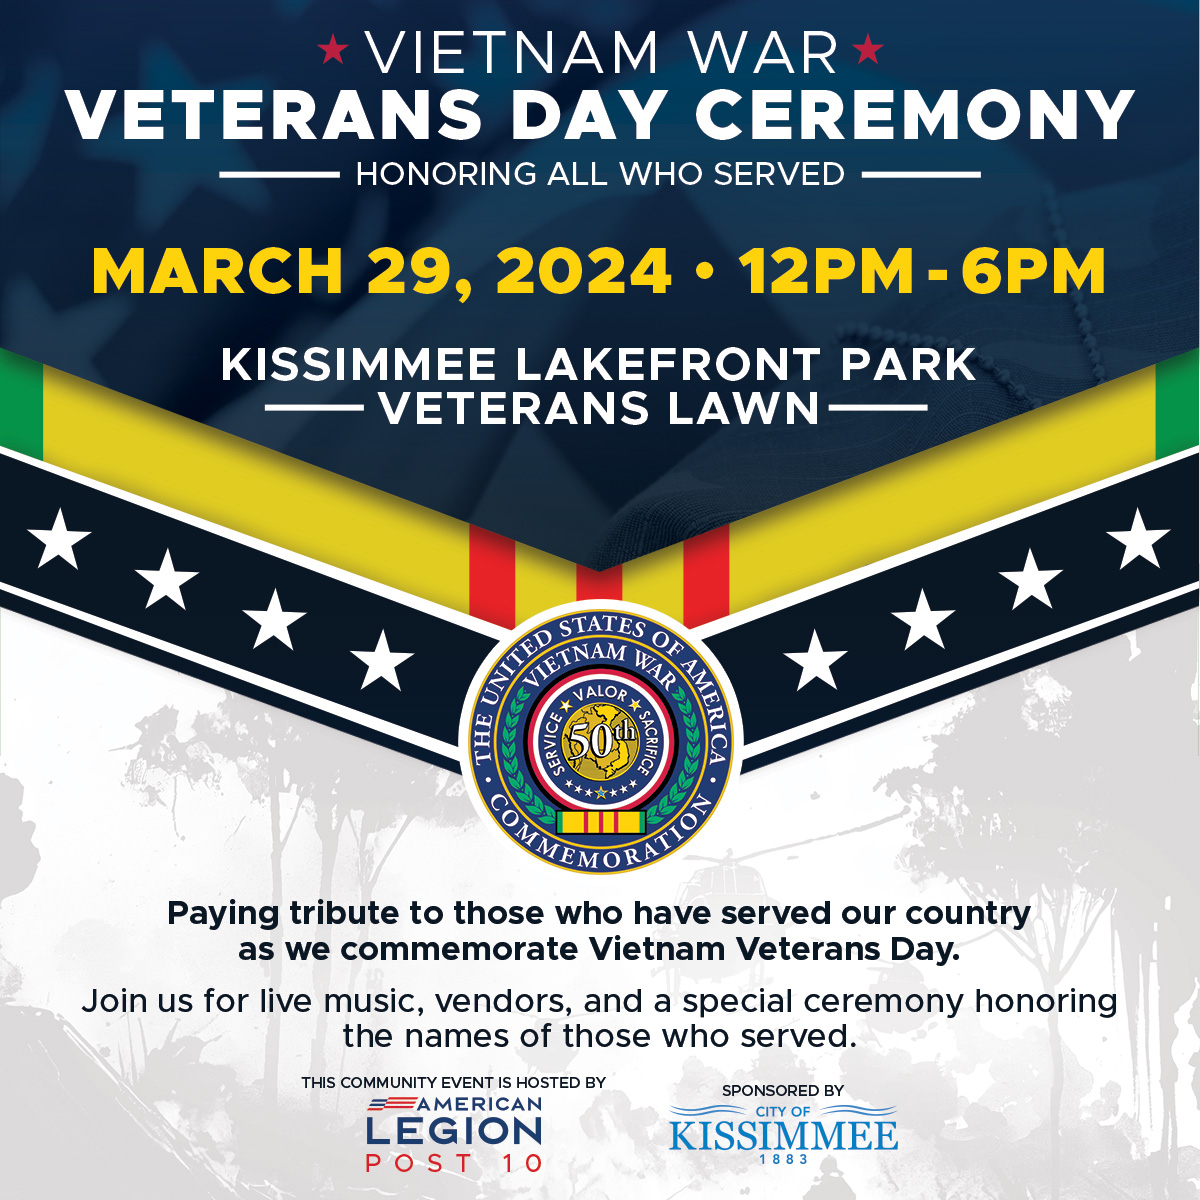 Join us this Friday at the Kissimmee Lakefront Park Veterans Lawn for the Vietnam War Veterans Day Ceremony. The event kicks off at 12 PM. This community event is hosted by the American Legion Post 10.